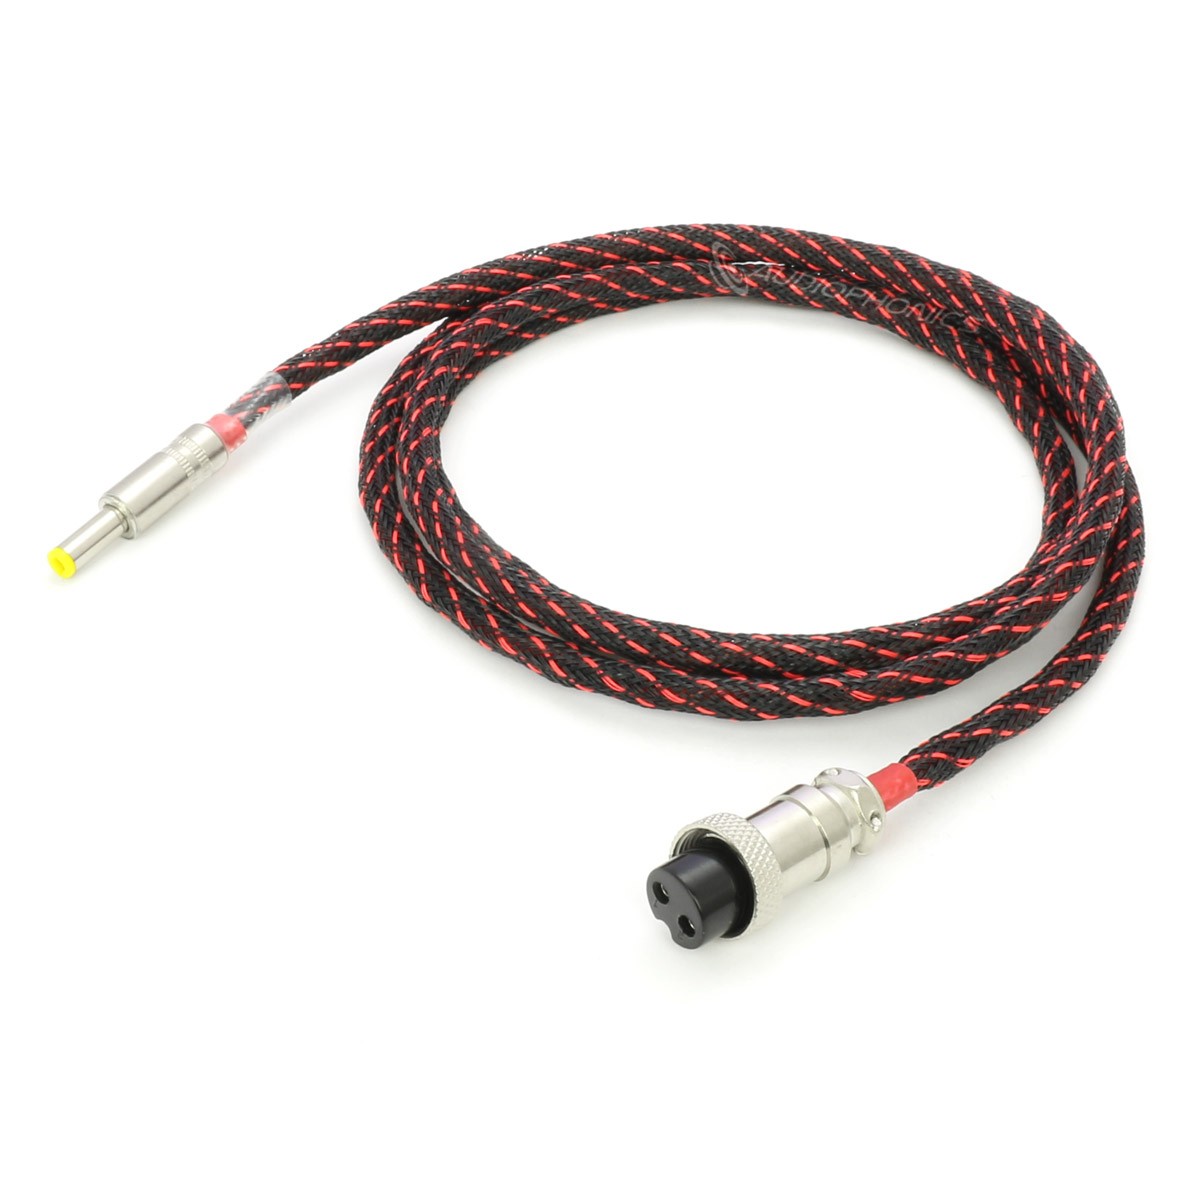 Power Cable GX16 to Jack DC 5.5 / 2.1mm to OFC 4N Copper 1.5m